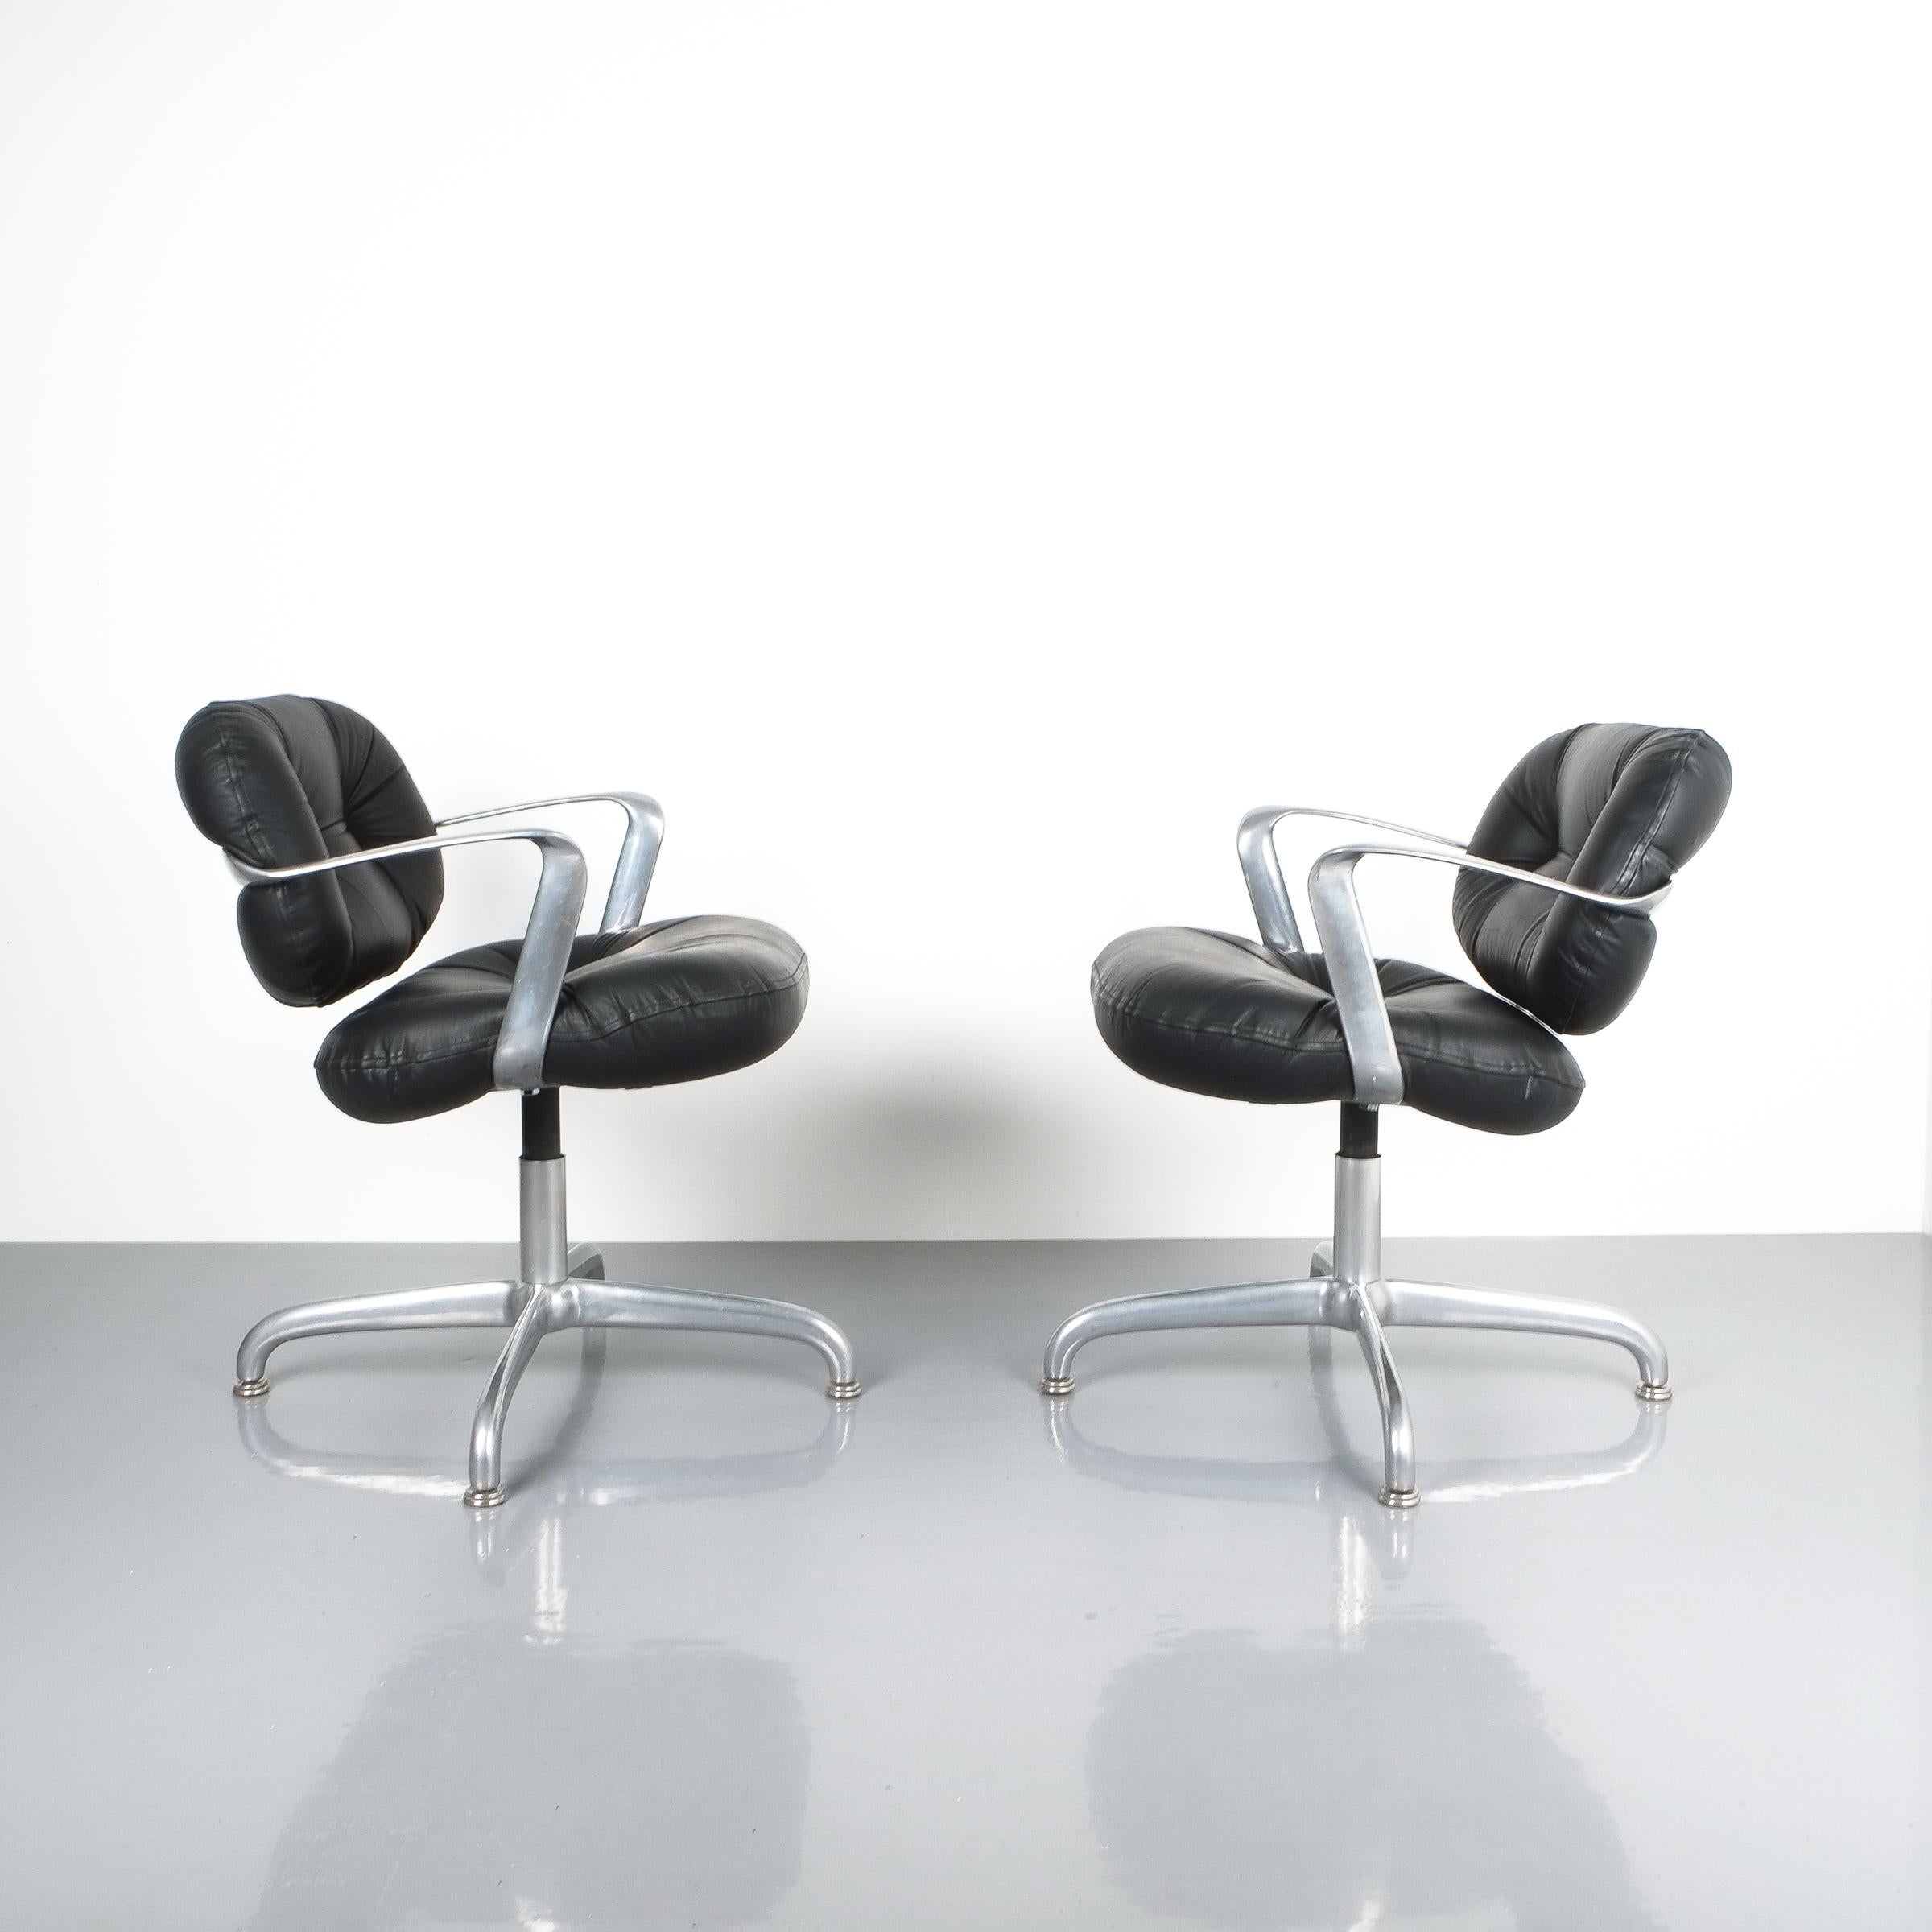 Pair of Morrison and Hannah Knoll office chair aluminium black leather, circa 1975 (Andrew Morrison and Bruce Hannah for Knoll) two (2) office chairs in black leather on a swivel base in aluminium. Both are in good vintage condition, no major flaws.